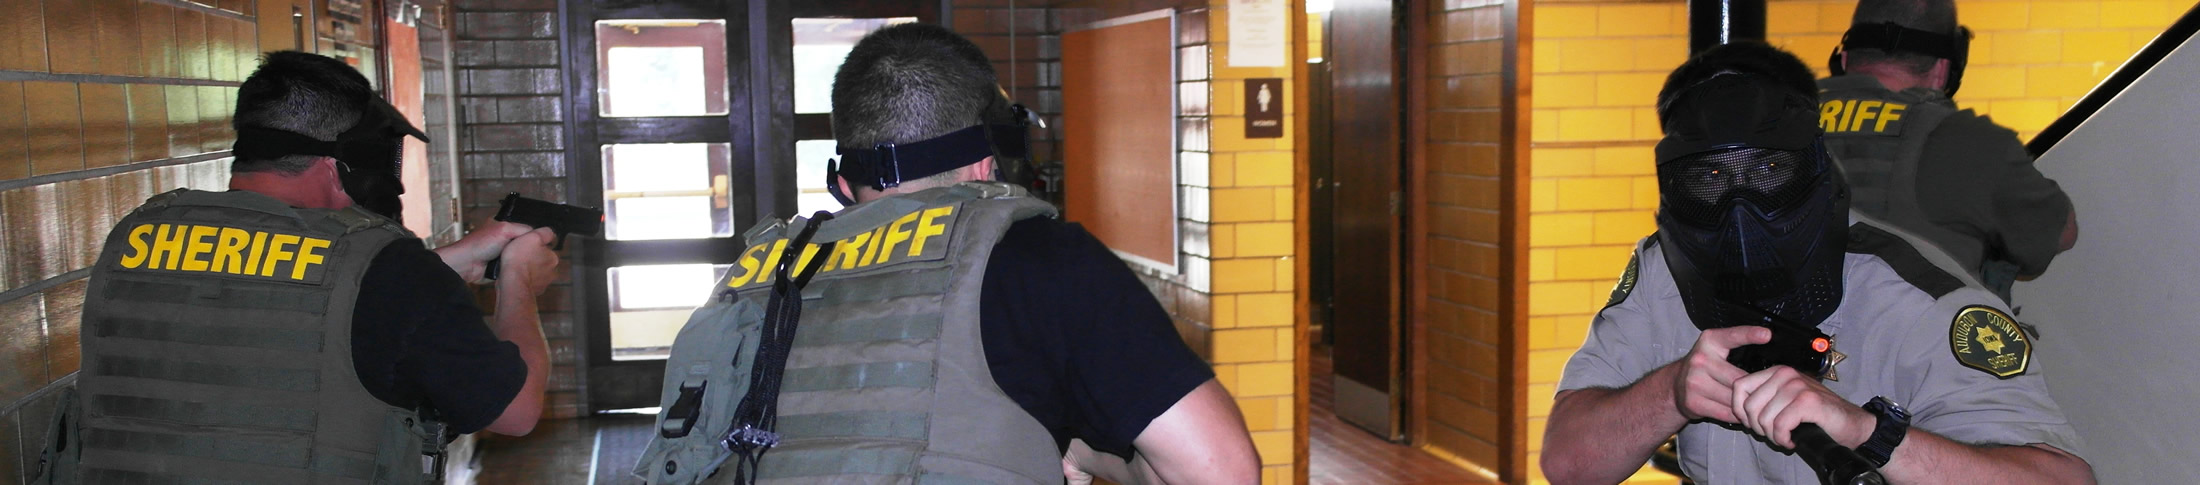 active shooter response / tactical entry training for law enforcement